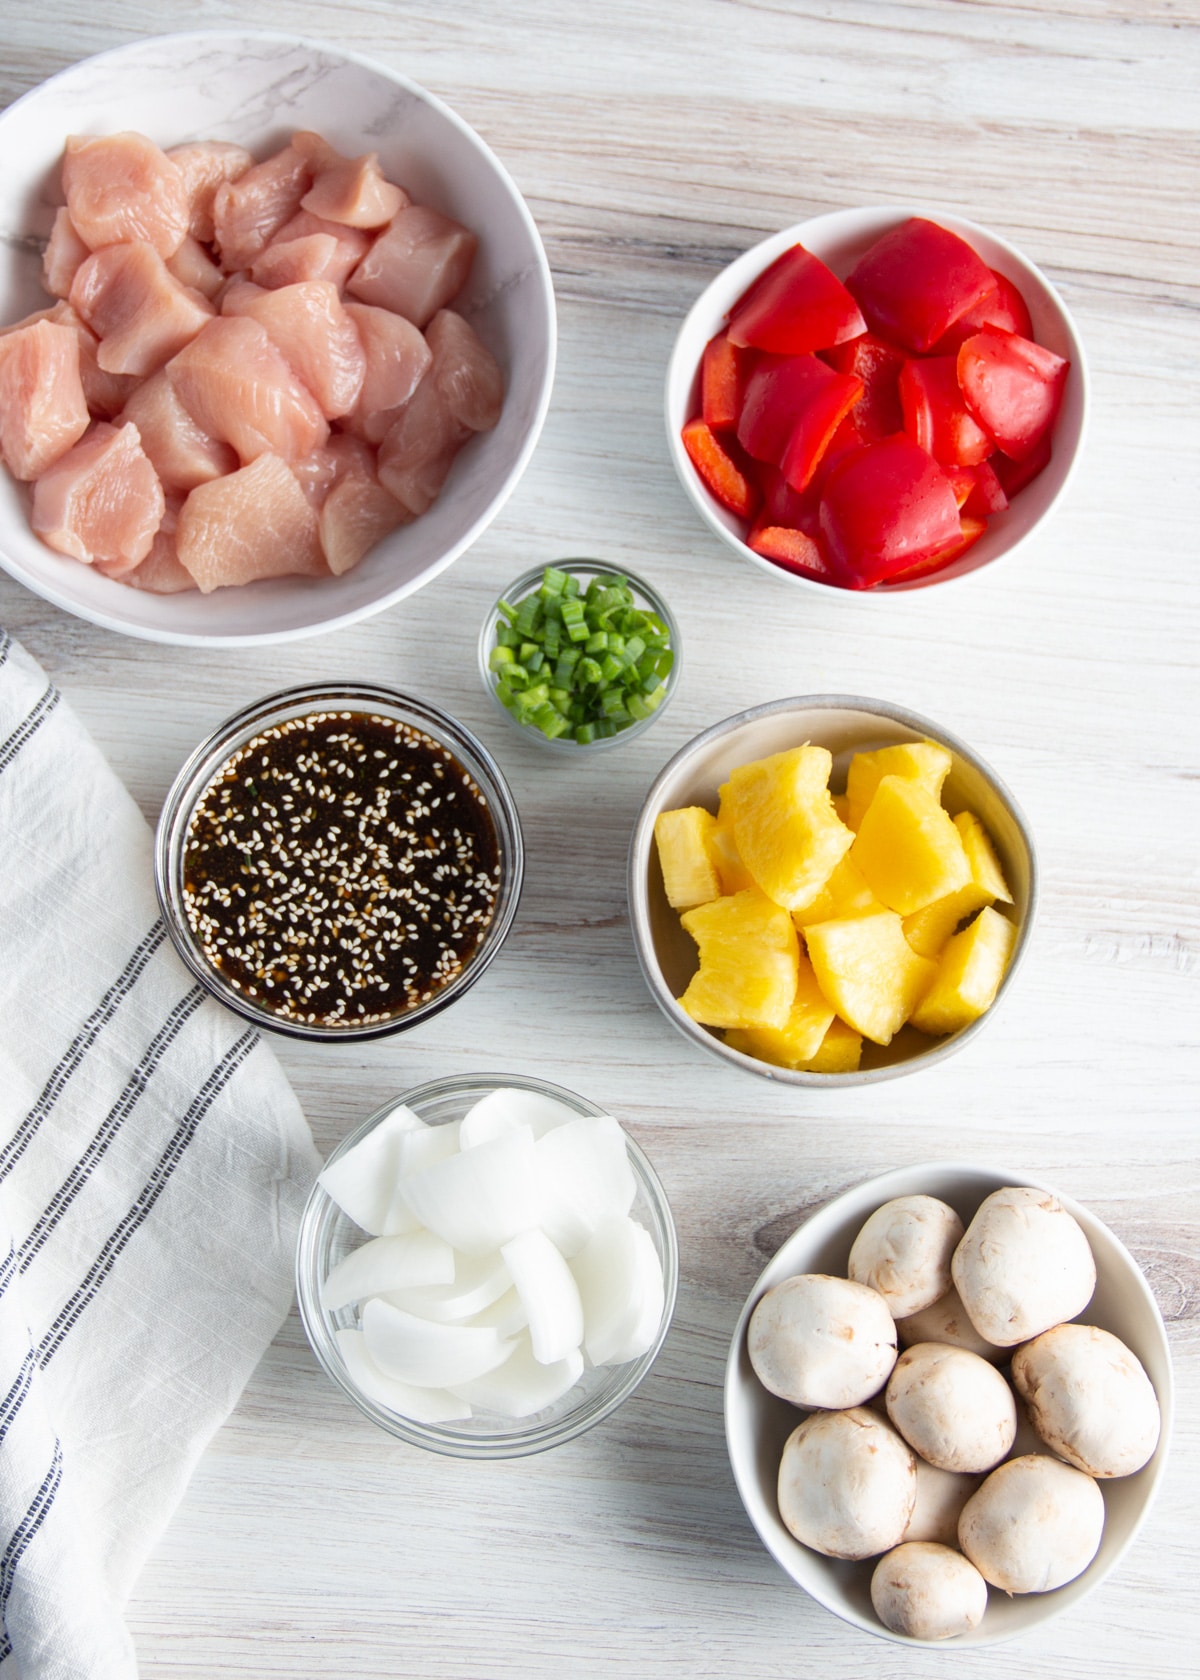 Picture of cut up ingredients in bowls. Chicken, pineapple, mushrooms, peppers, onion, teriyaki sauce, green onions.